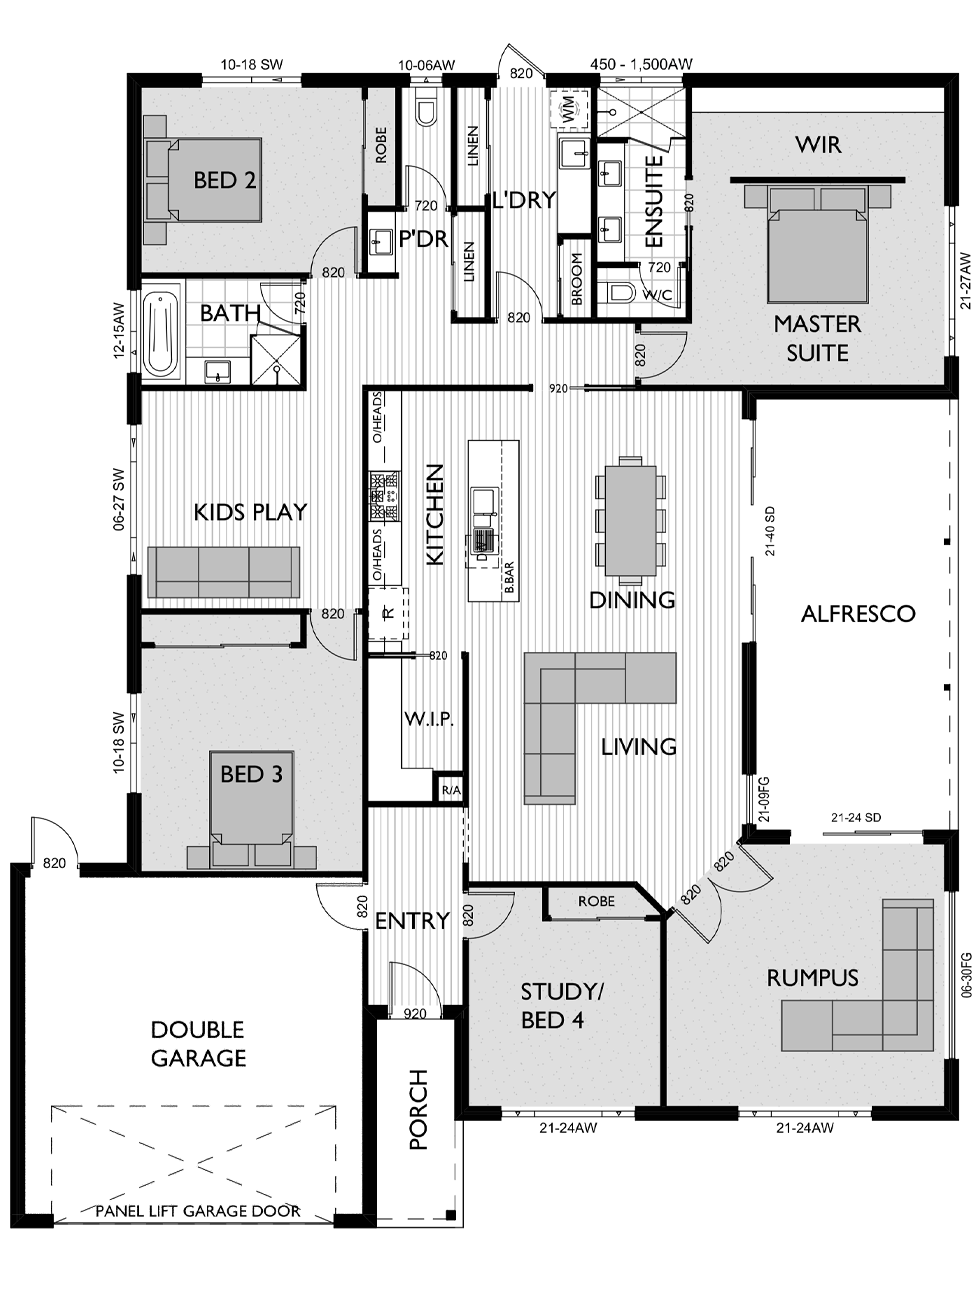 Floor Plan for Virtue Homes Montiage 32 family home